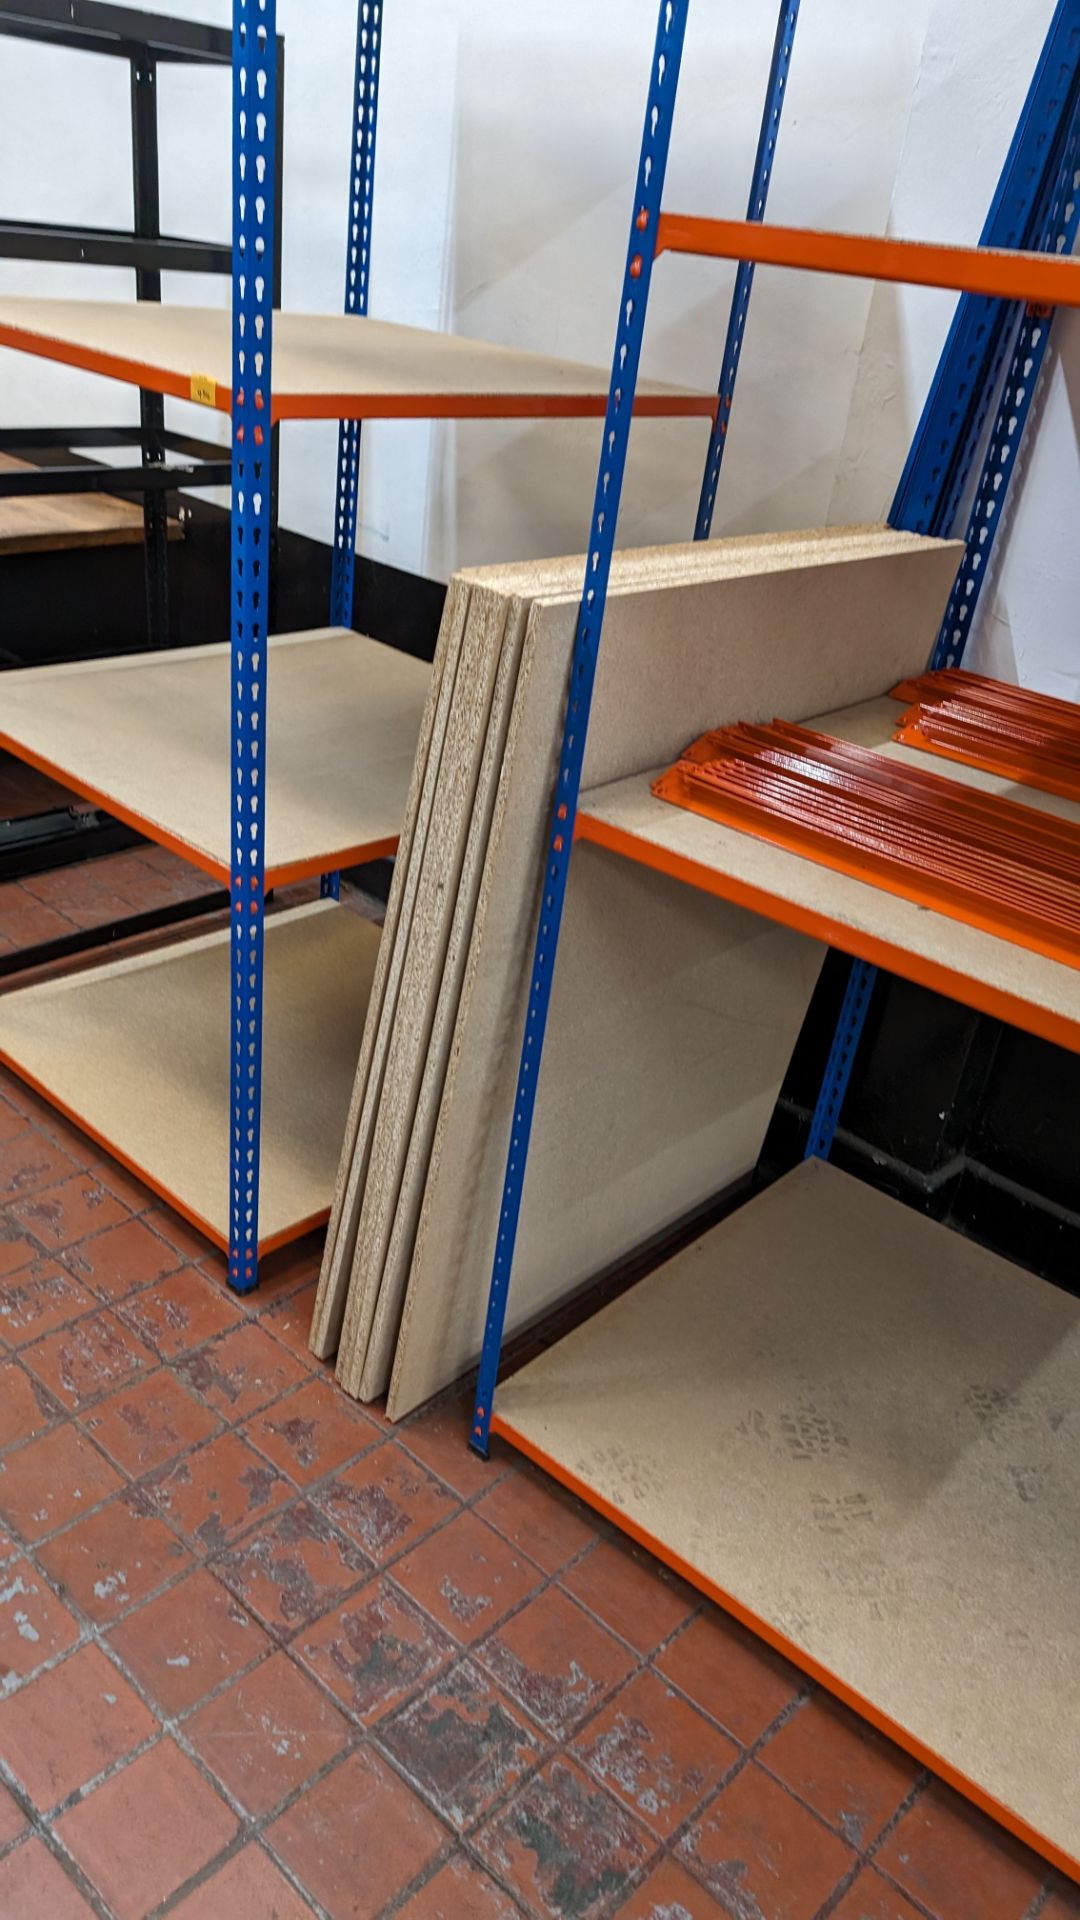 4 off bays of Rapid Racking blue and orange racking, each with four shelves. One bay has a footprin - Image 4 of 8